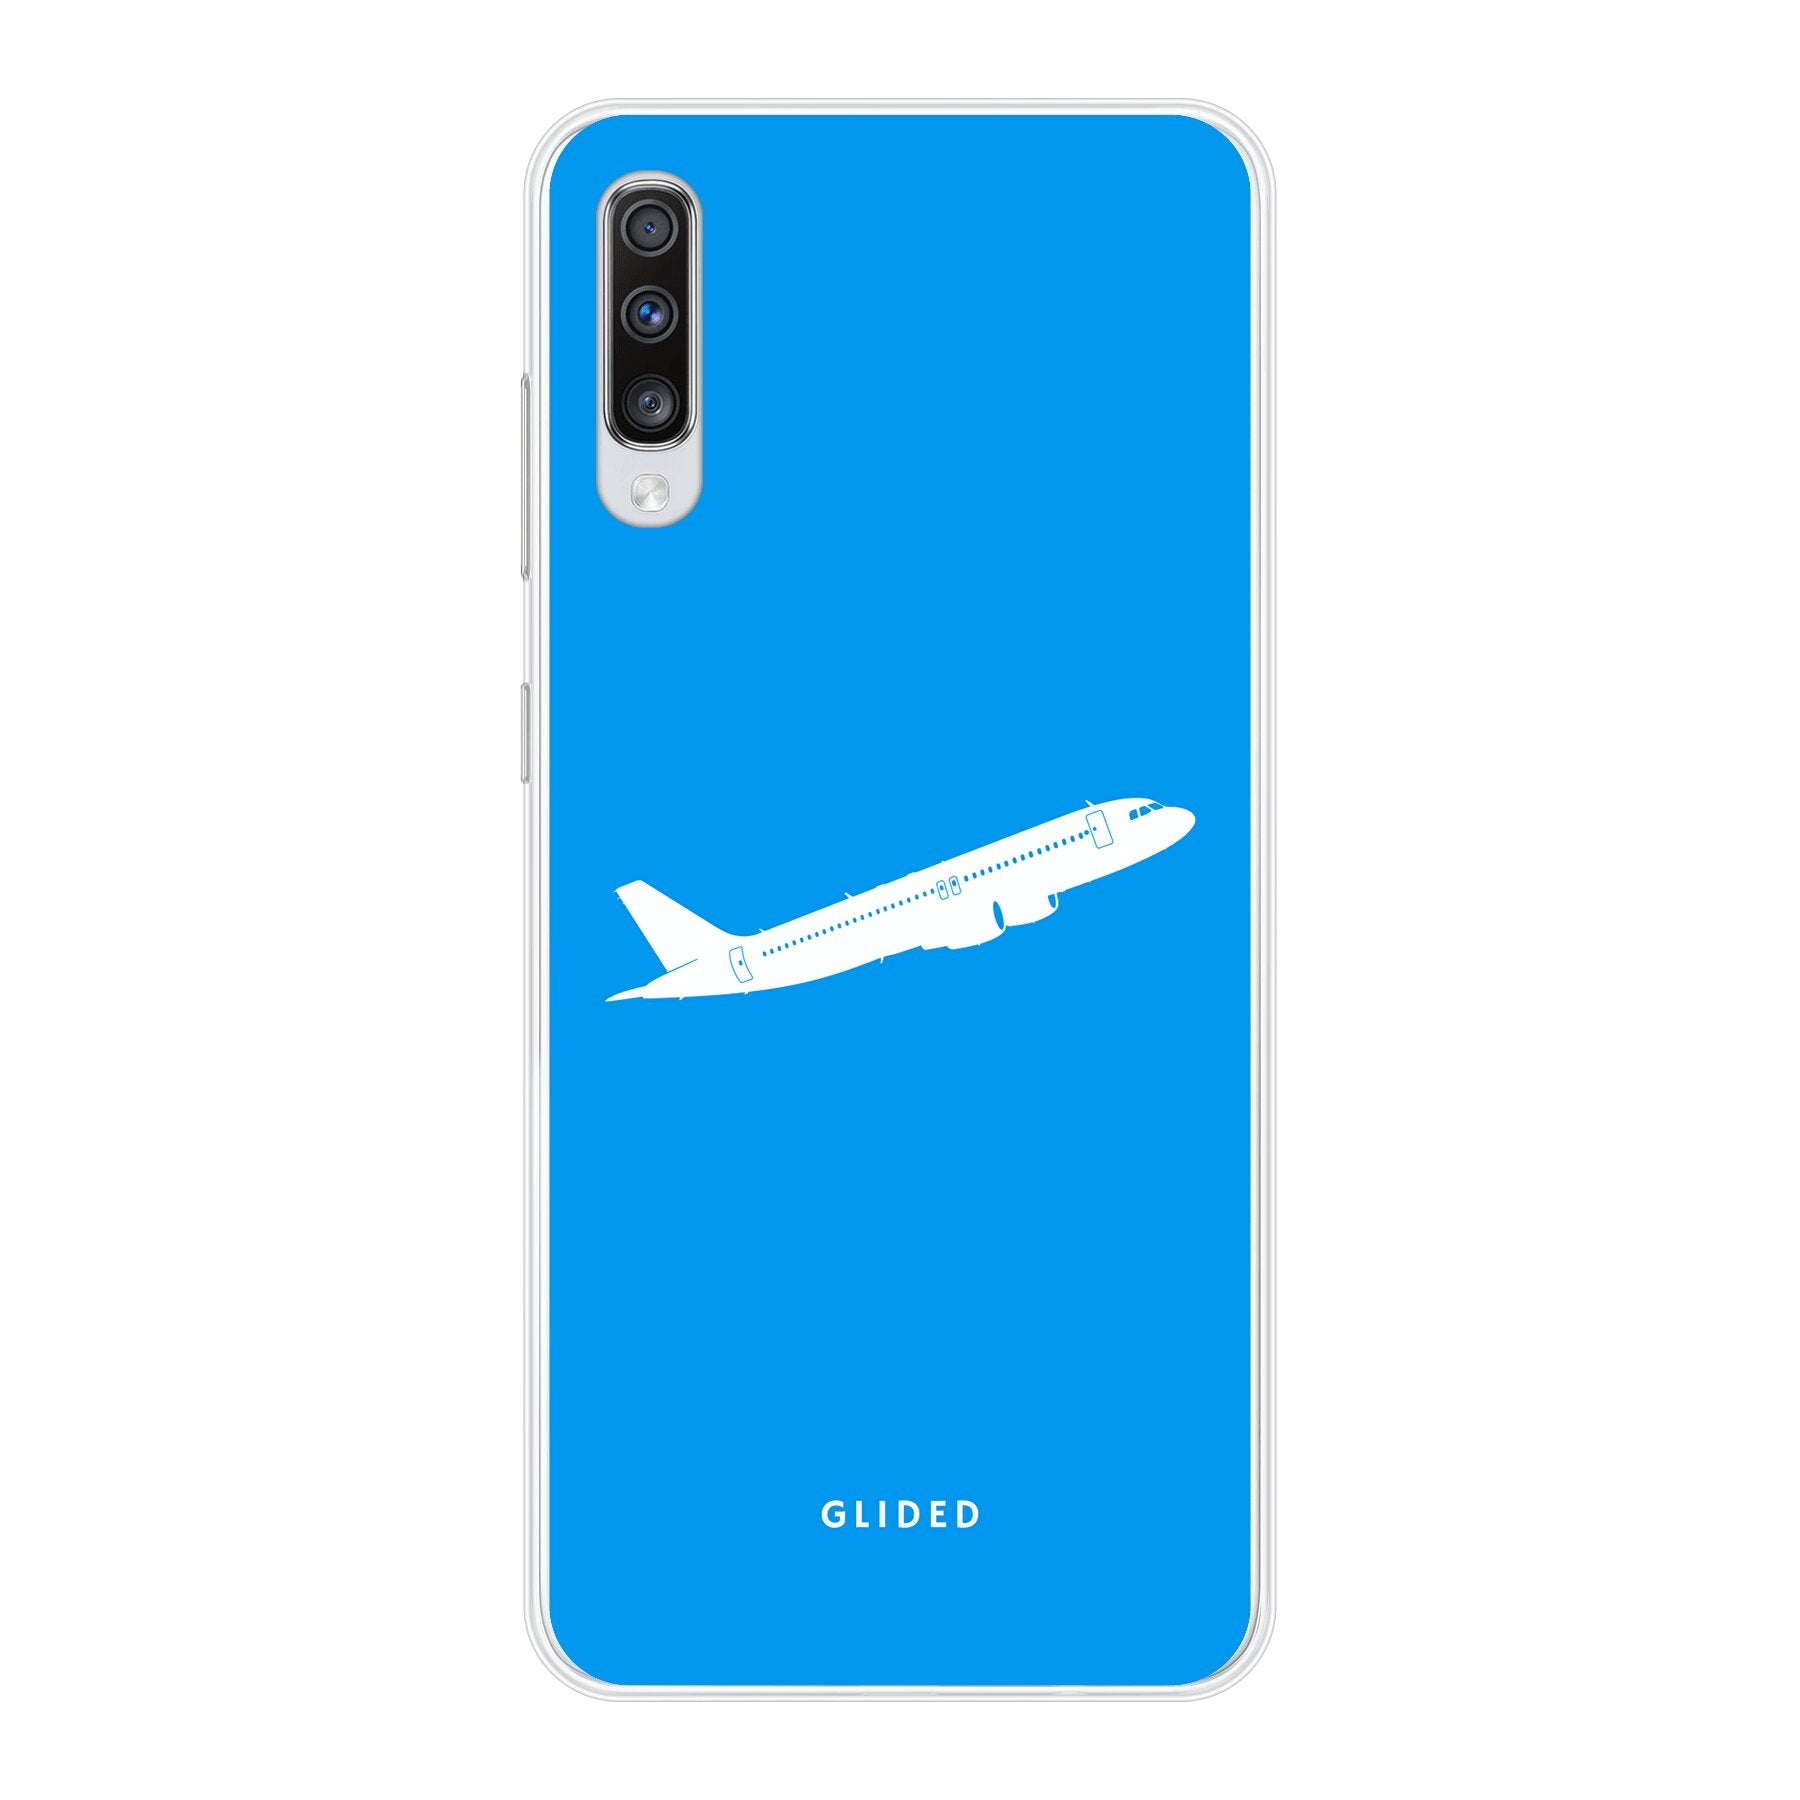 Up to Sky - Samsung Galaxy A70 Handyhülle Soft case